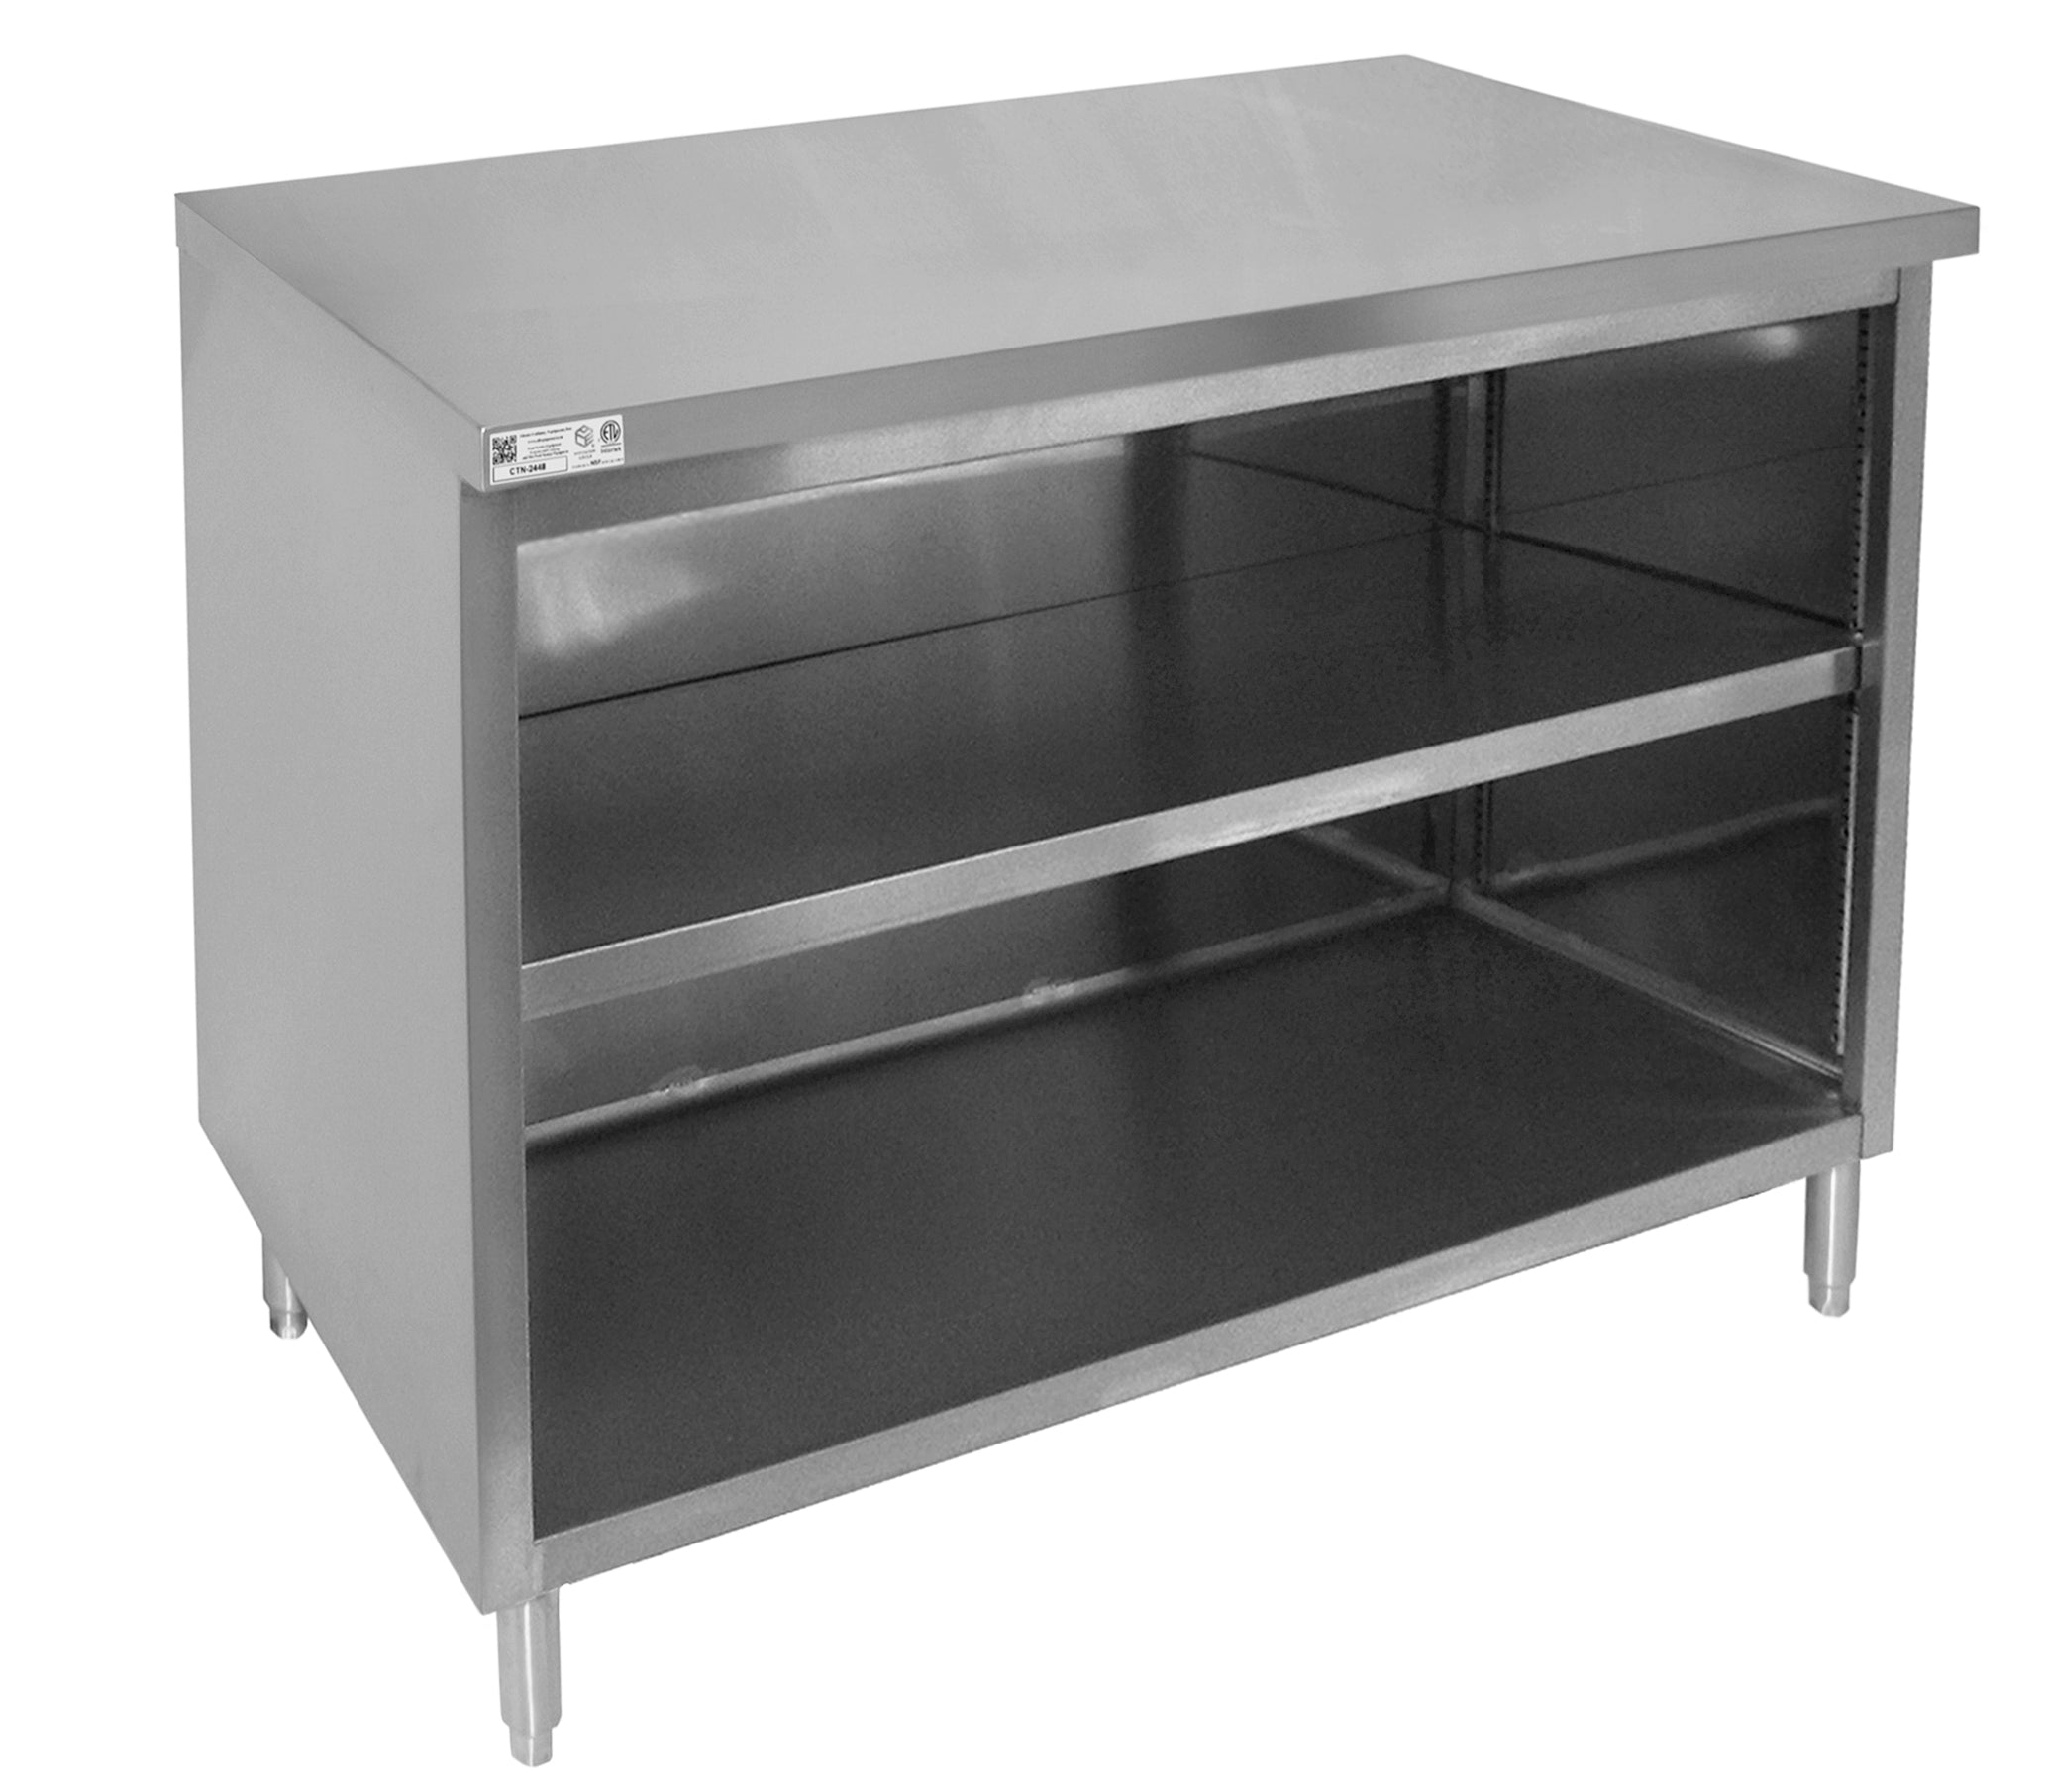 GSW All Stainless Steel Flat Top Enclosed Work Table Cabinet No Door 24"(W) x 72"(L) x 35"(H)